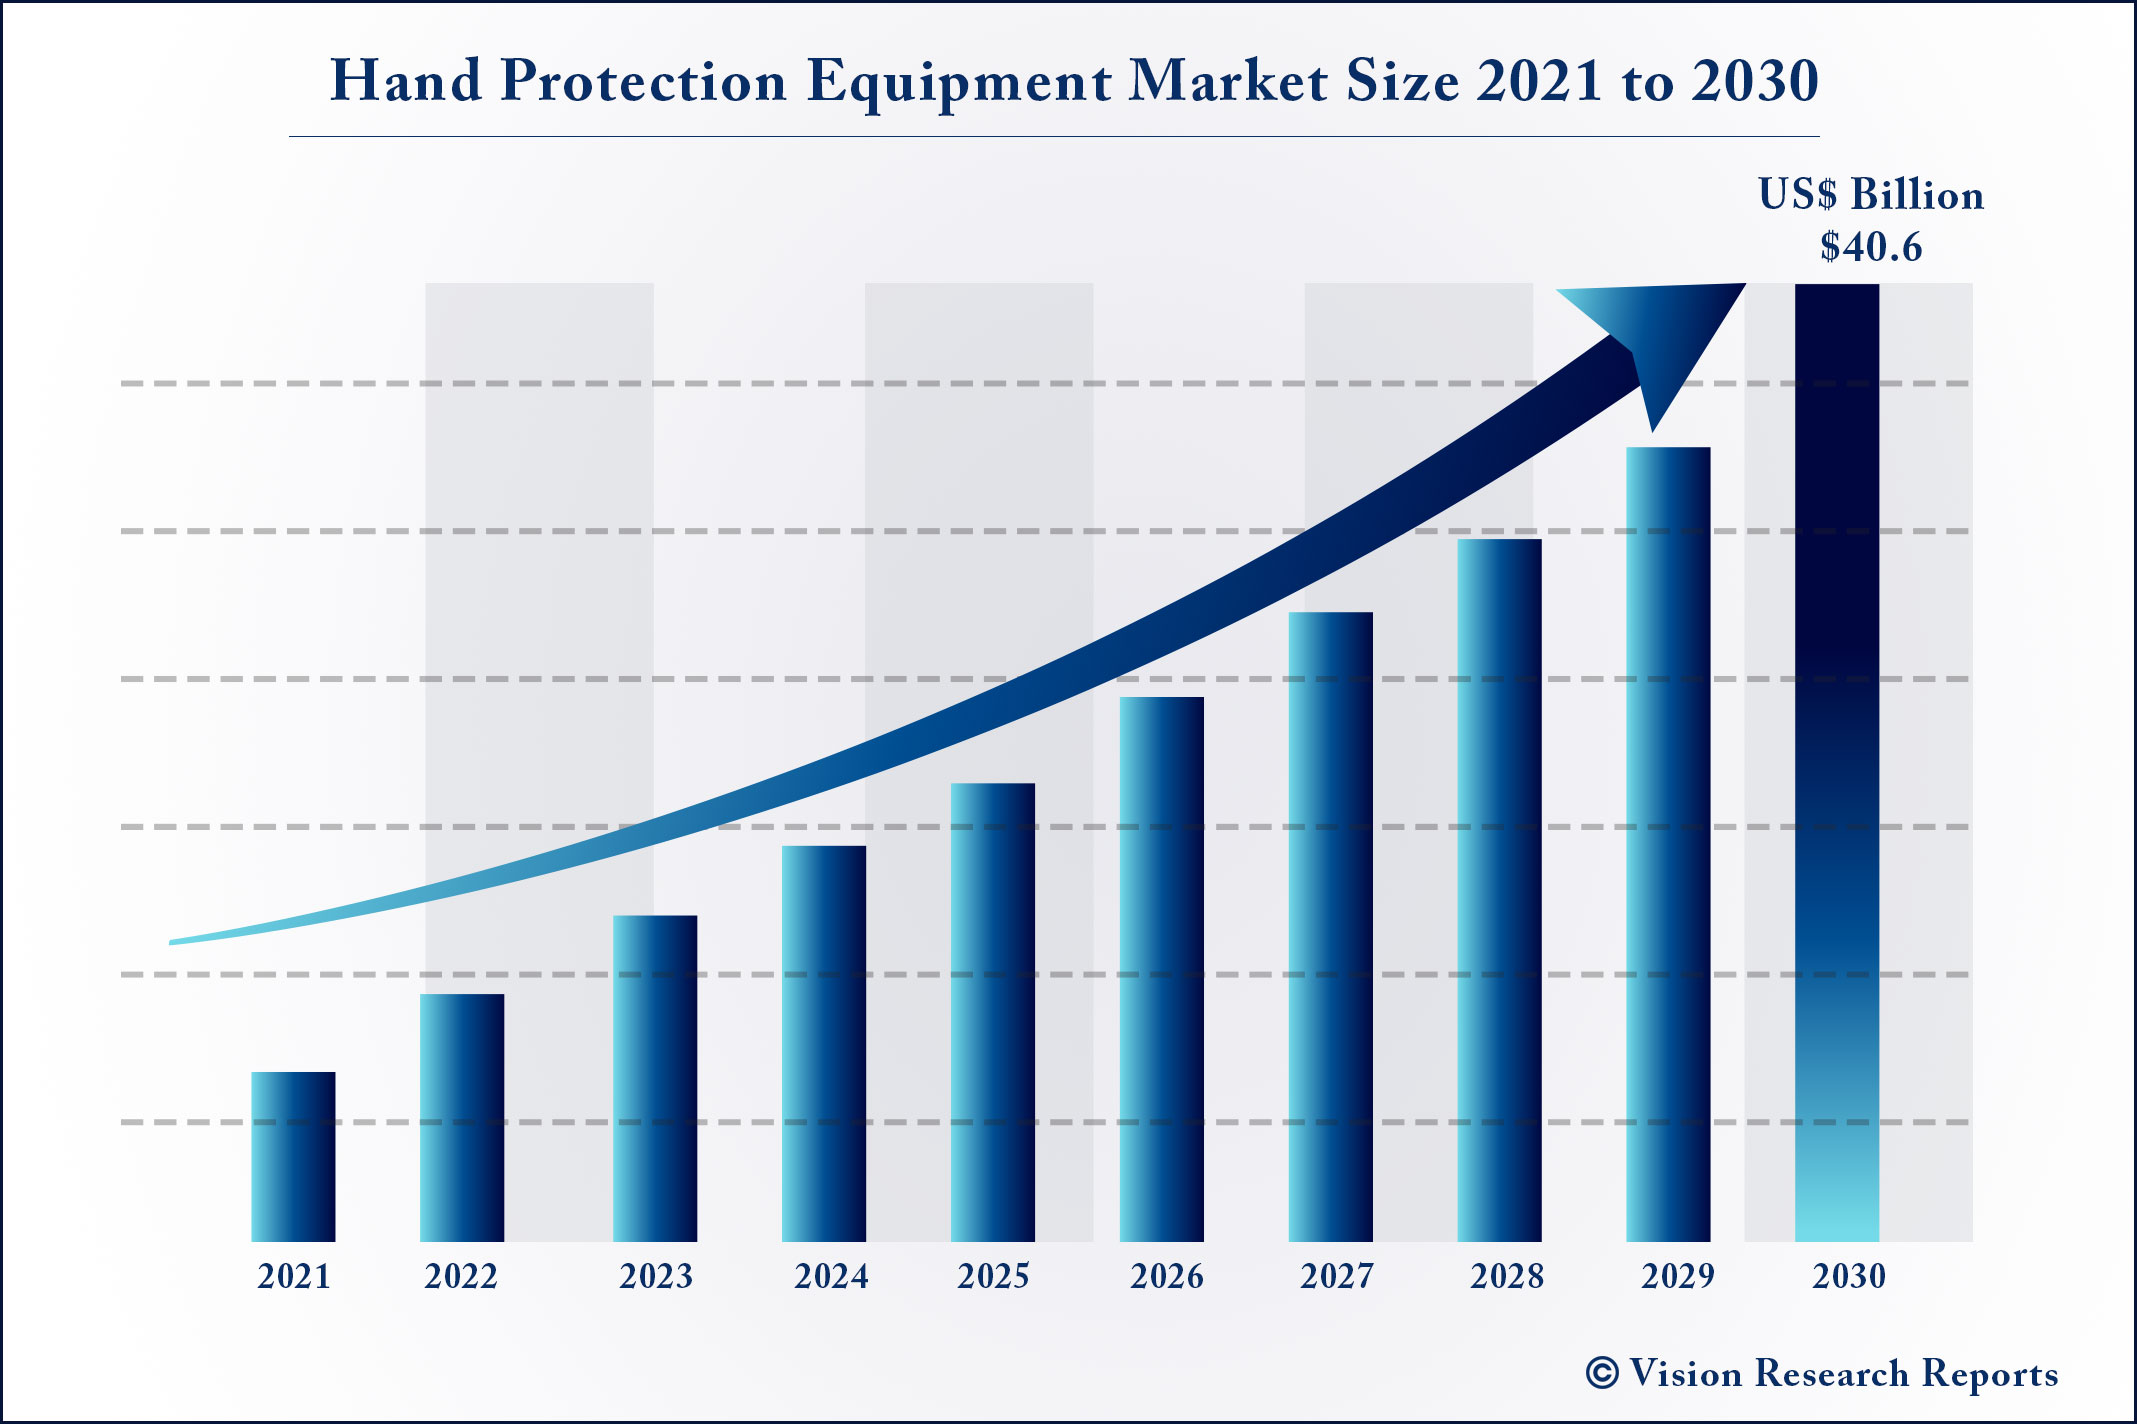 Hand Protection Equipment Market Size 2021 to 2030